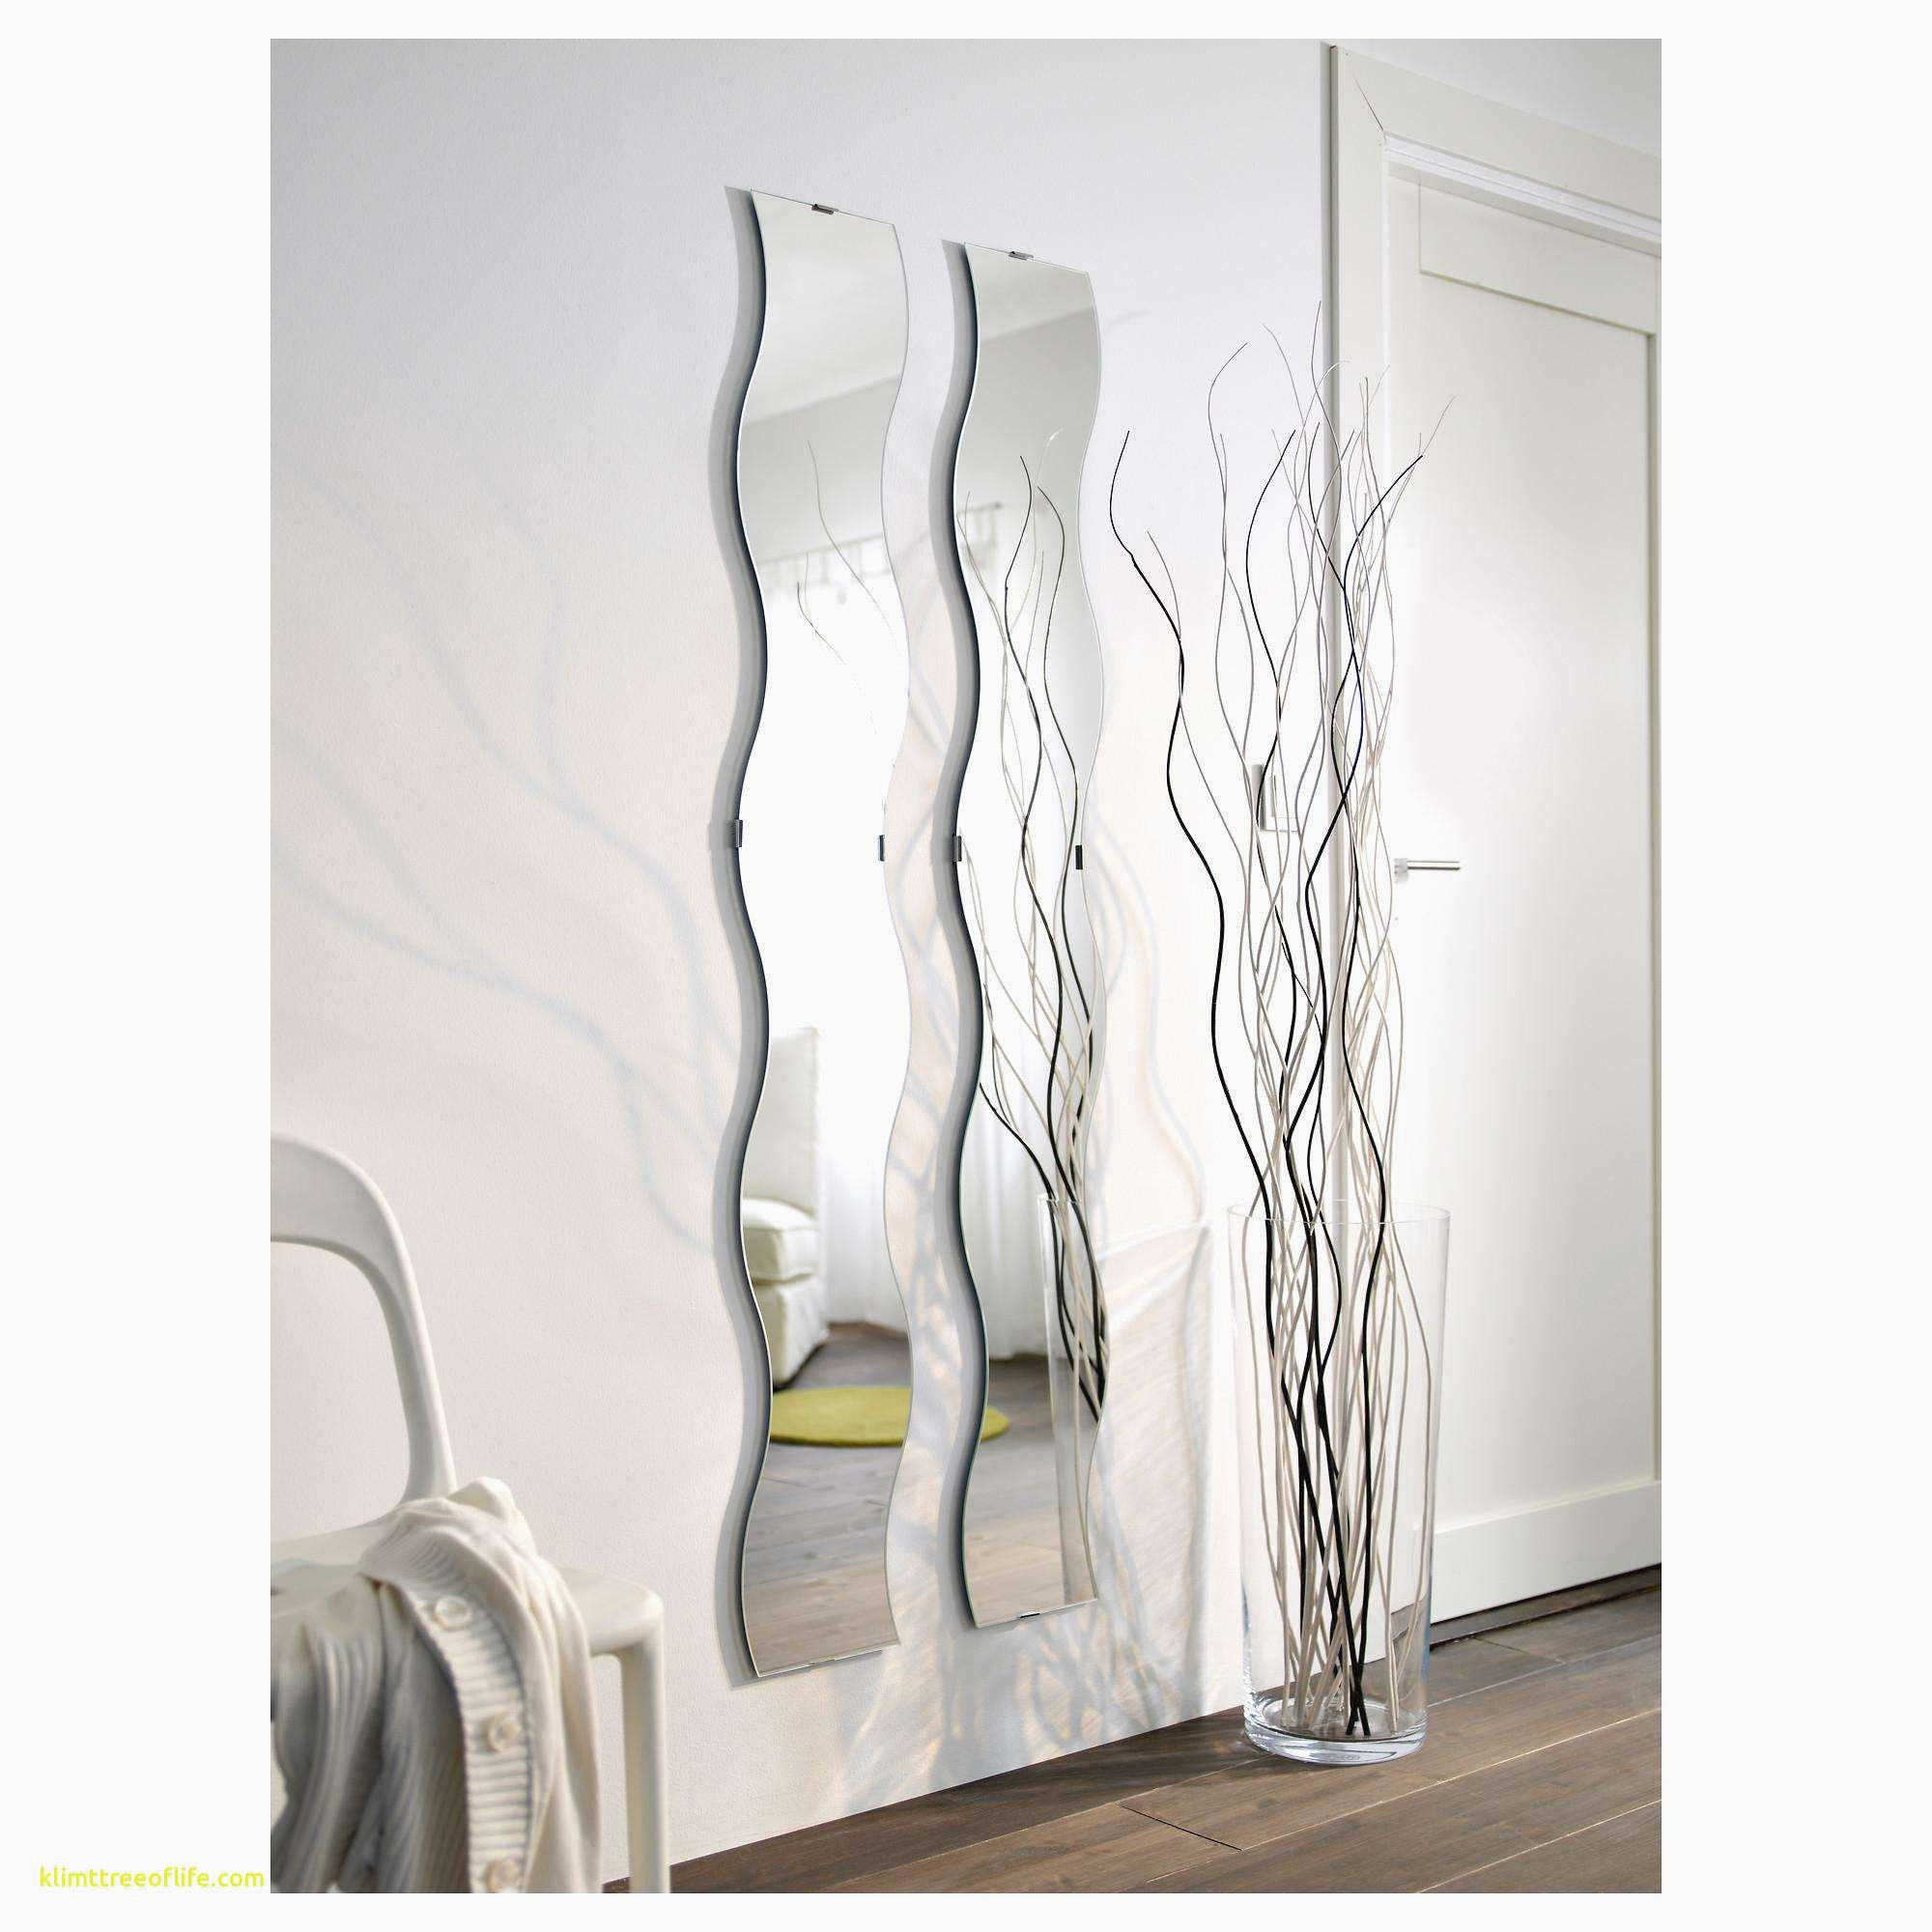 24 Lovely Long Neck Clear Glass Vase 2024 free download long neck clear glass vase of walmart glass vases beautiful new design awesome ikea mantel ikea intended for walmart glass vases beautiful new design awesome ikea mantel ikea fireplace mante